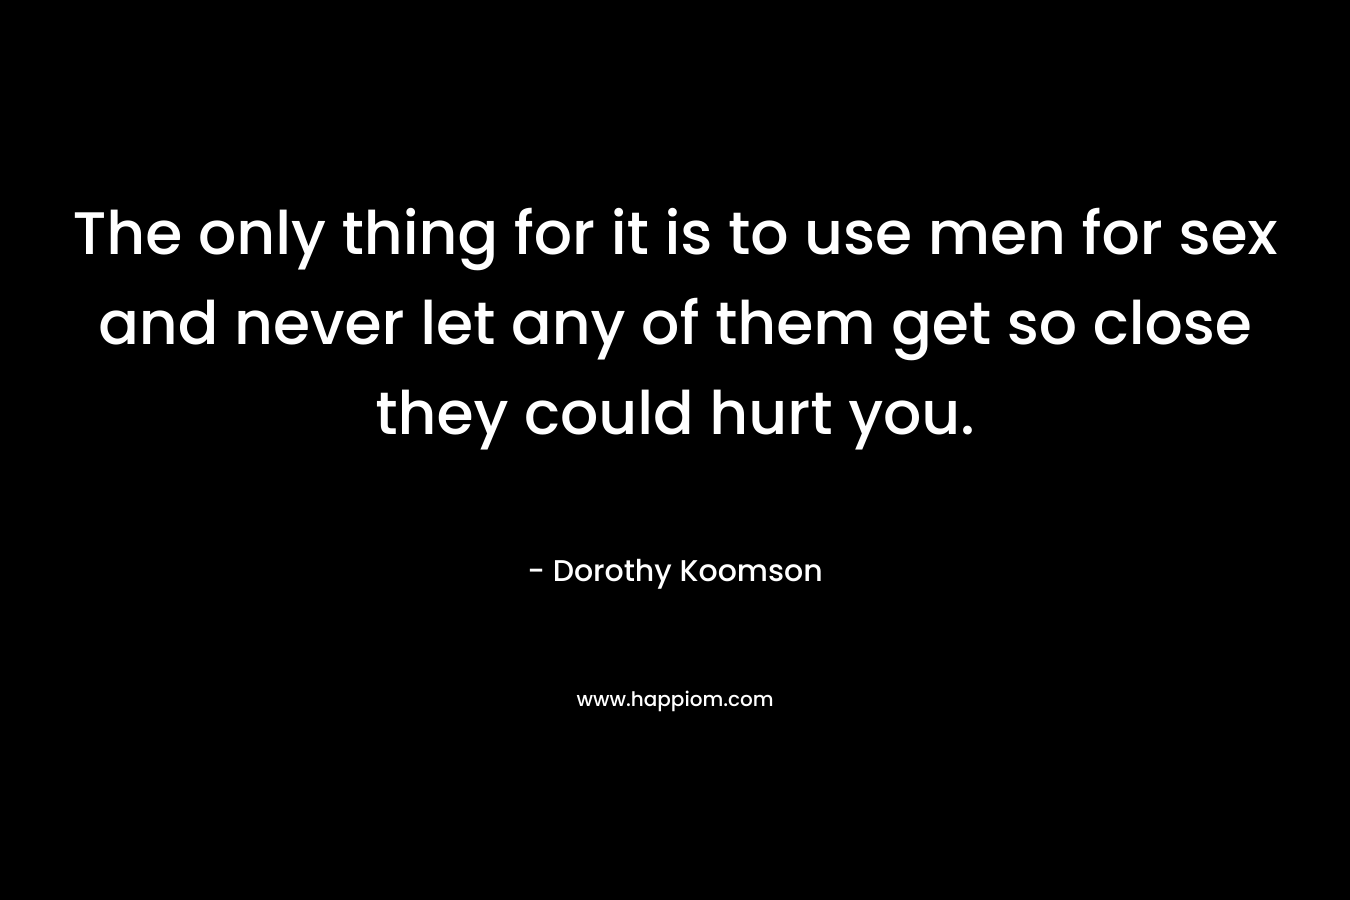 The only thing for it is to use men for sex and never let any of them get so close they could hurt you. – Dorothy Koomson